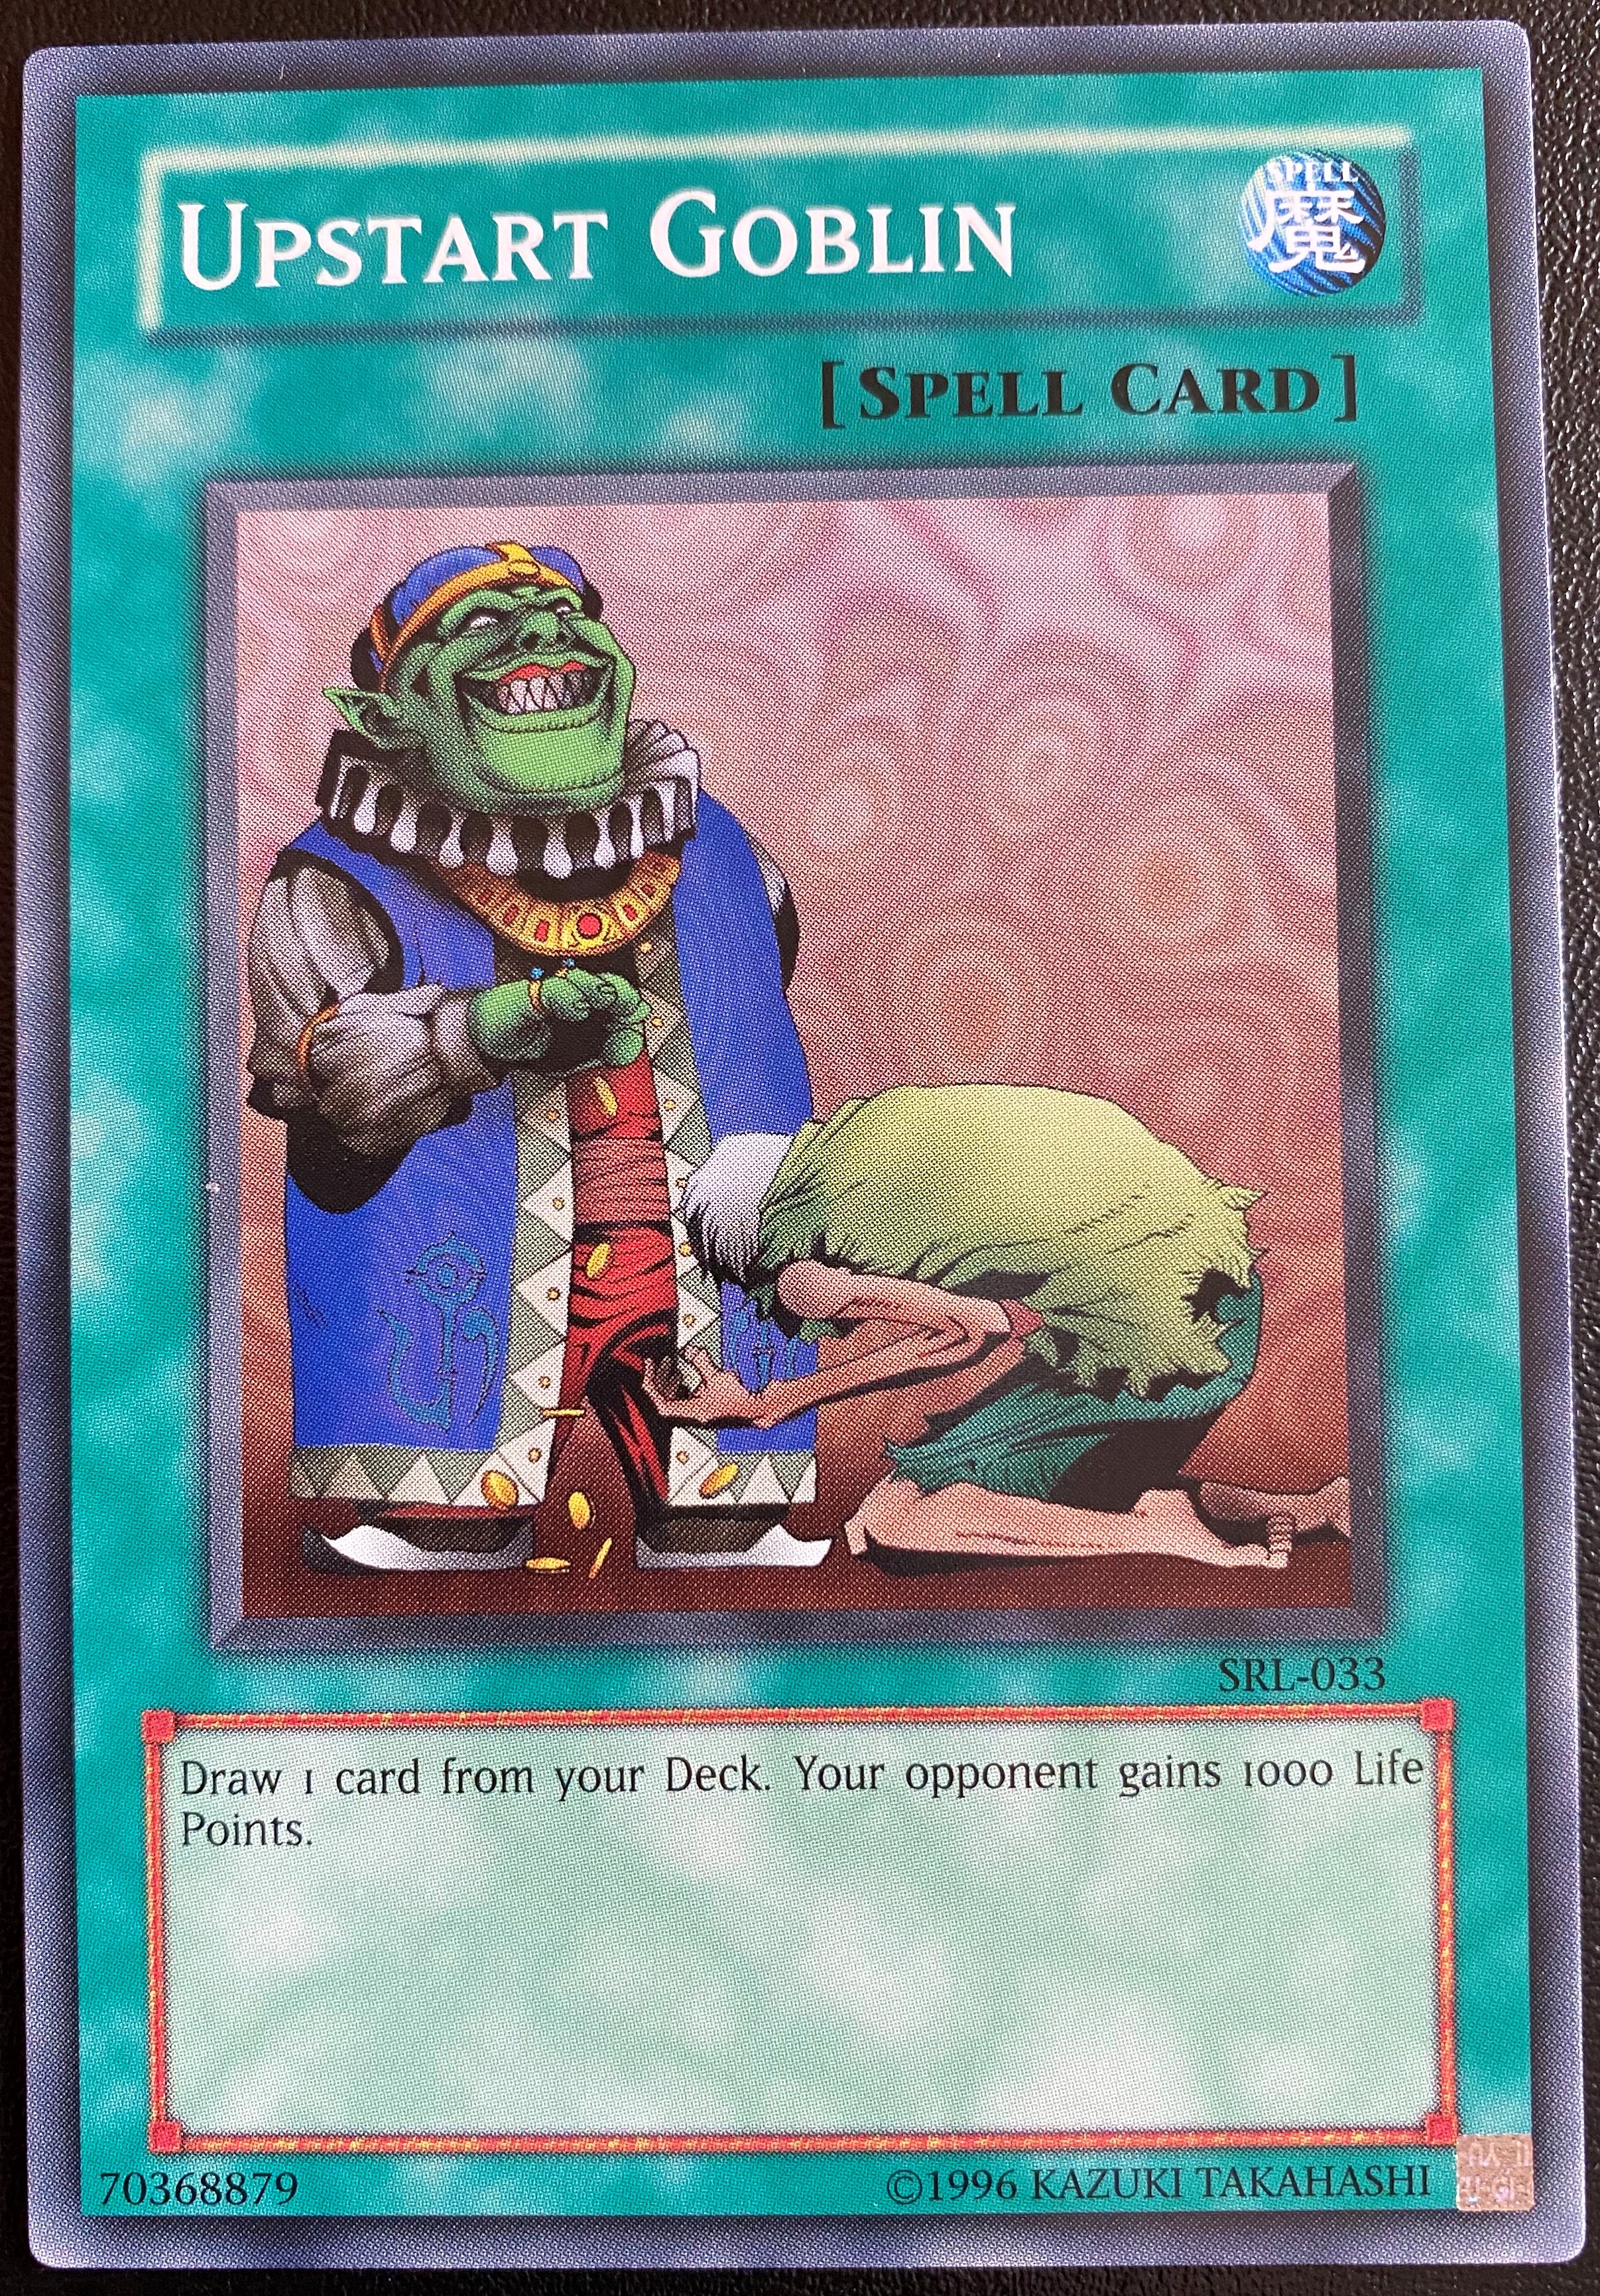 [Translate to English:] A Yu-Gi-Oh! card “Upstart Goblin” that thins the deck to up consistency, popularized very late after its creation.